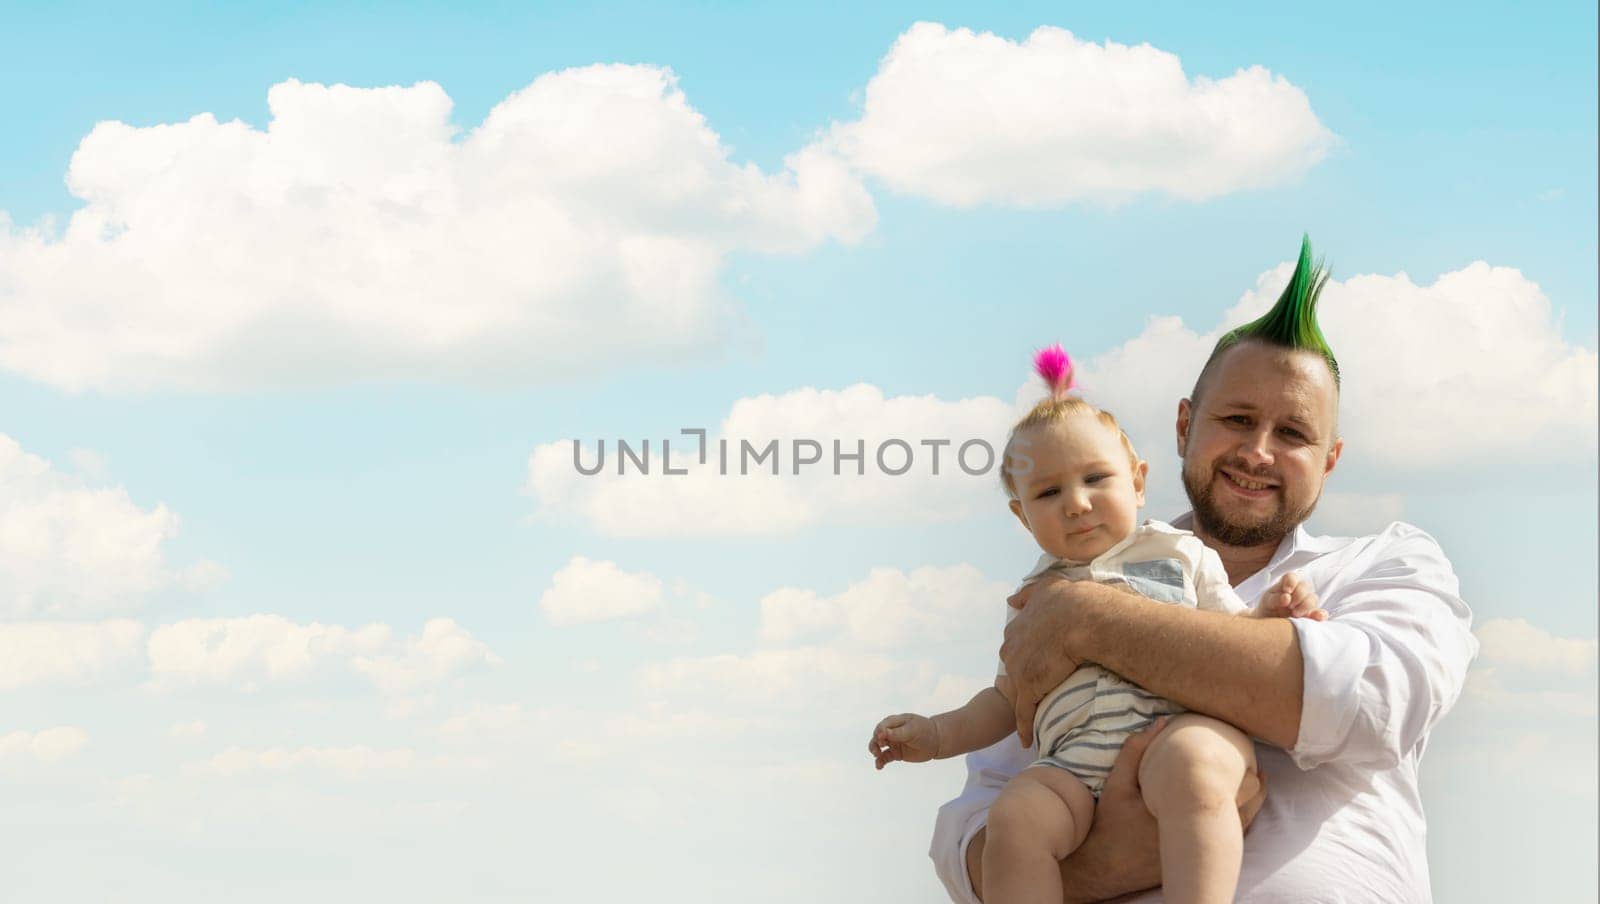 Happy father on vacation - man holding his little baby son on sky background. Portrait